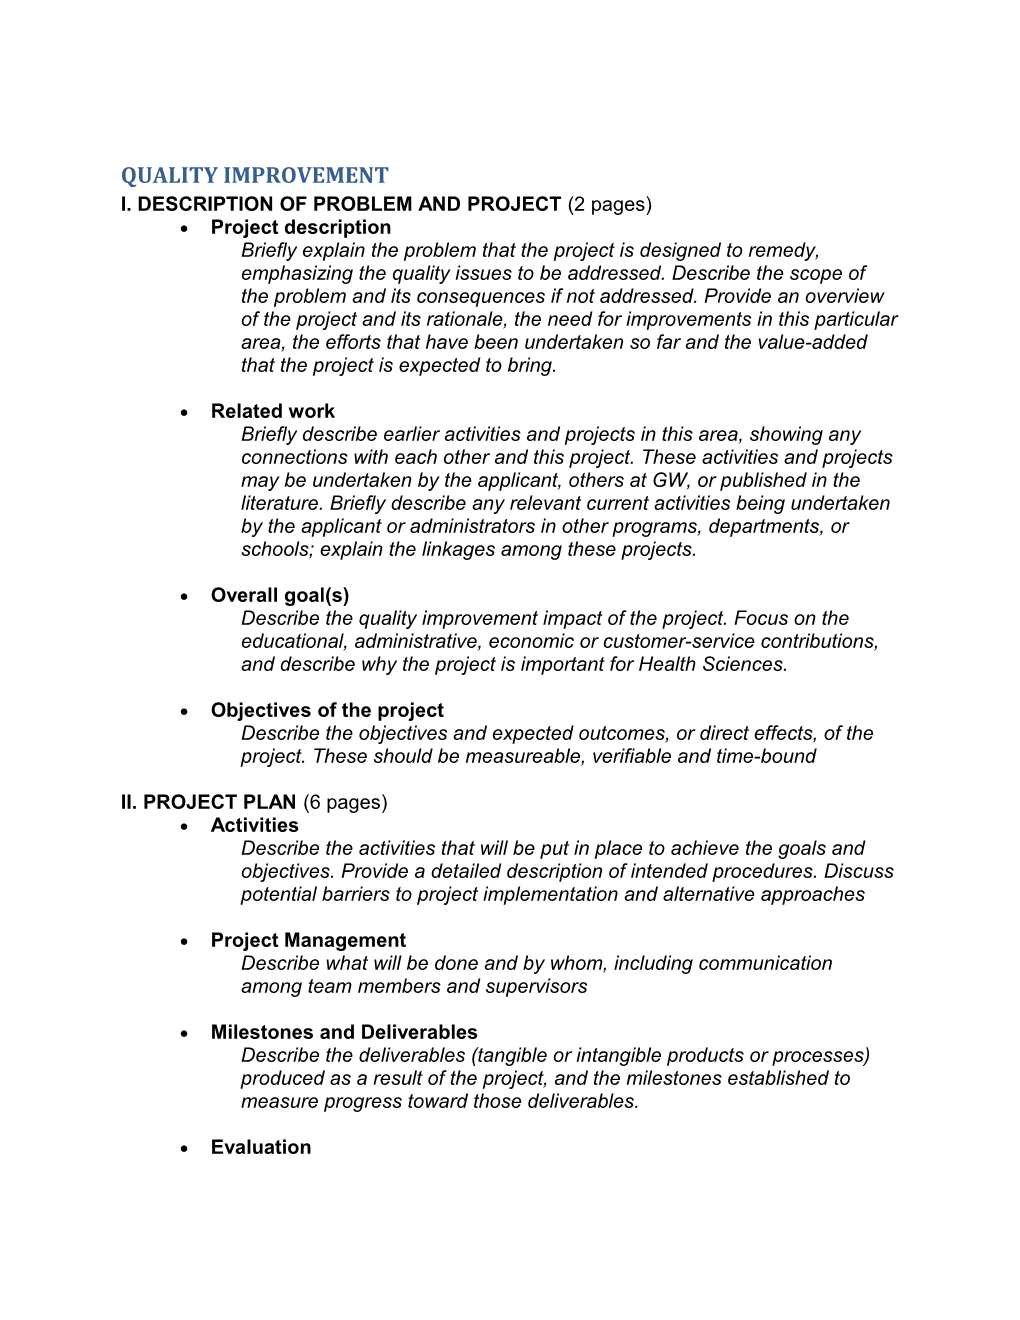 I. DESCRIPTION of PROBLEM and PROJECT (2 Pages)